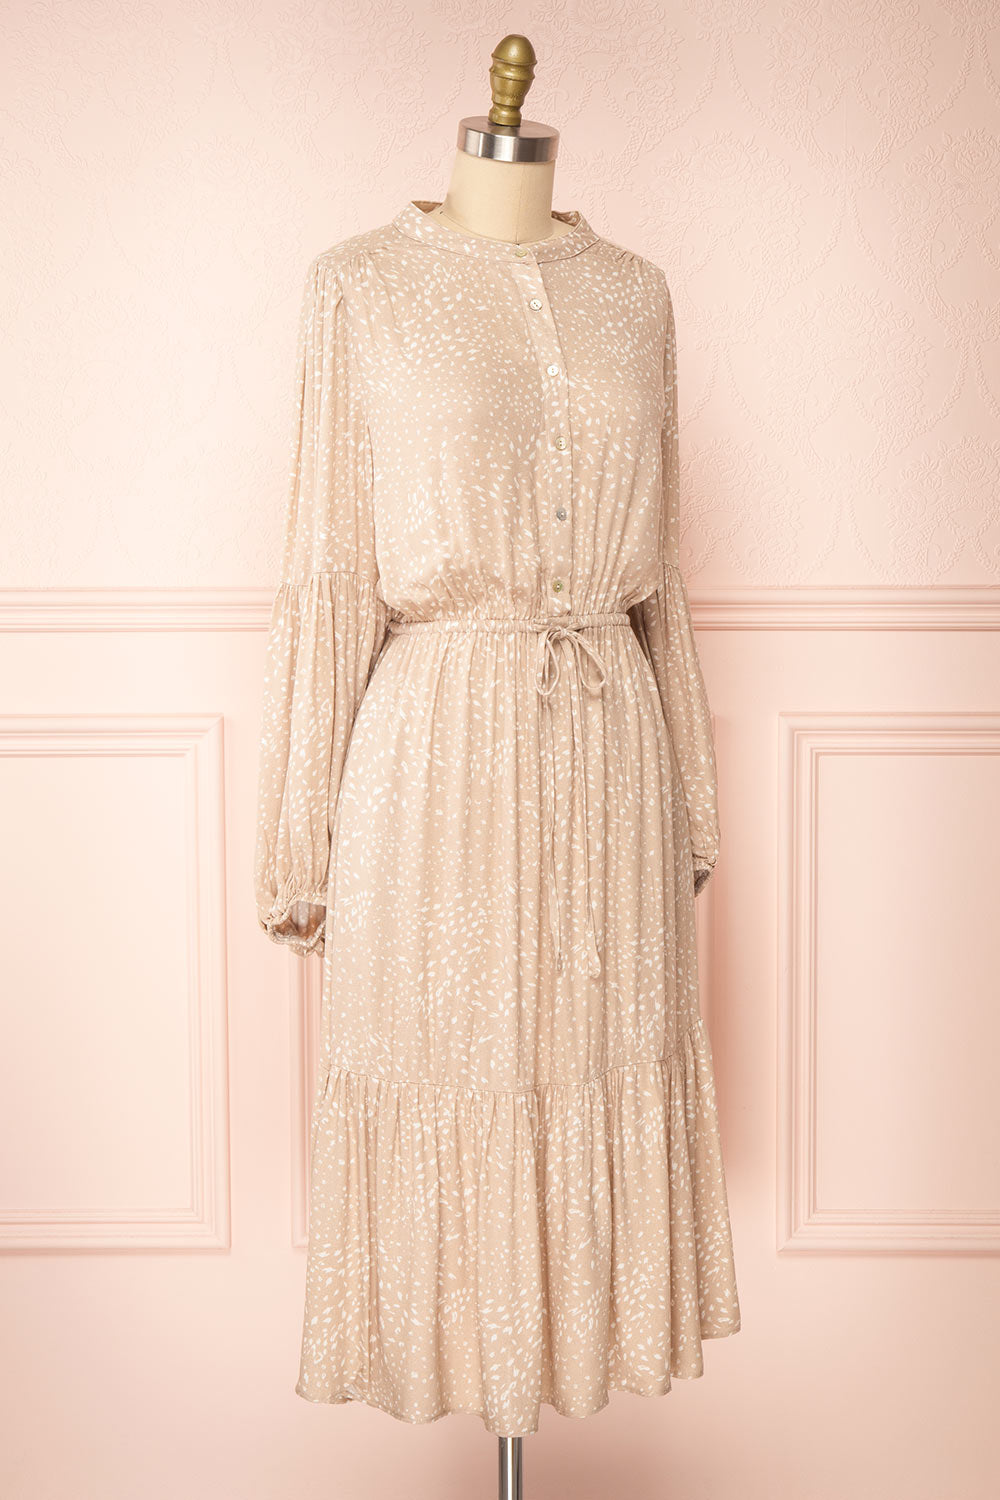 Evelyn Beige Long Sleeve Patterned Midi Dress w/ Cord | Boutique 1861 side view